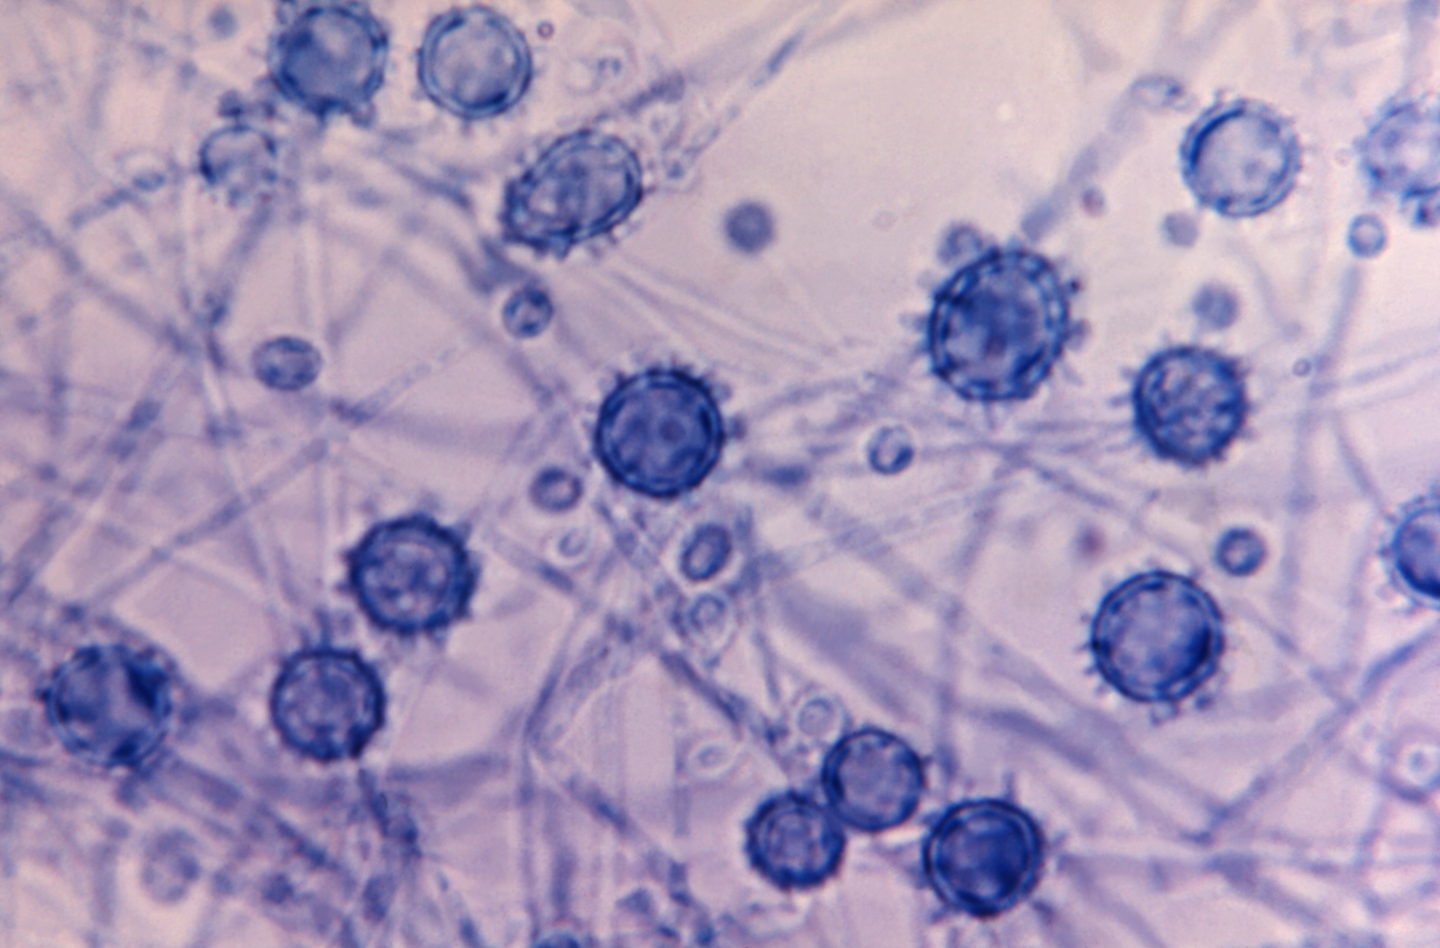 a microscope image of blue stained fungi that have spherical shapes